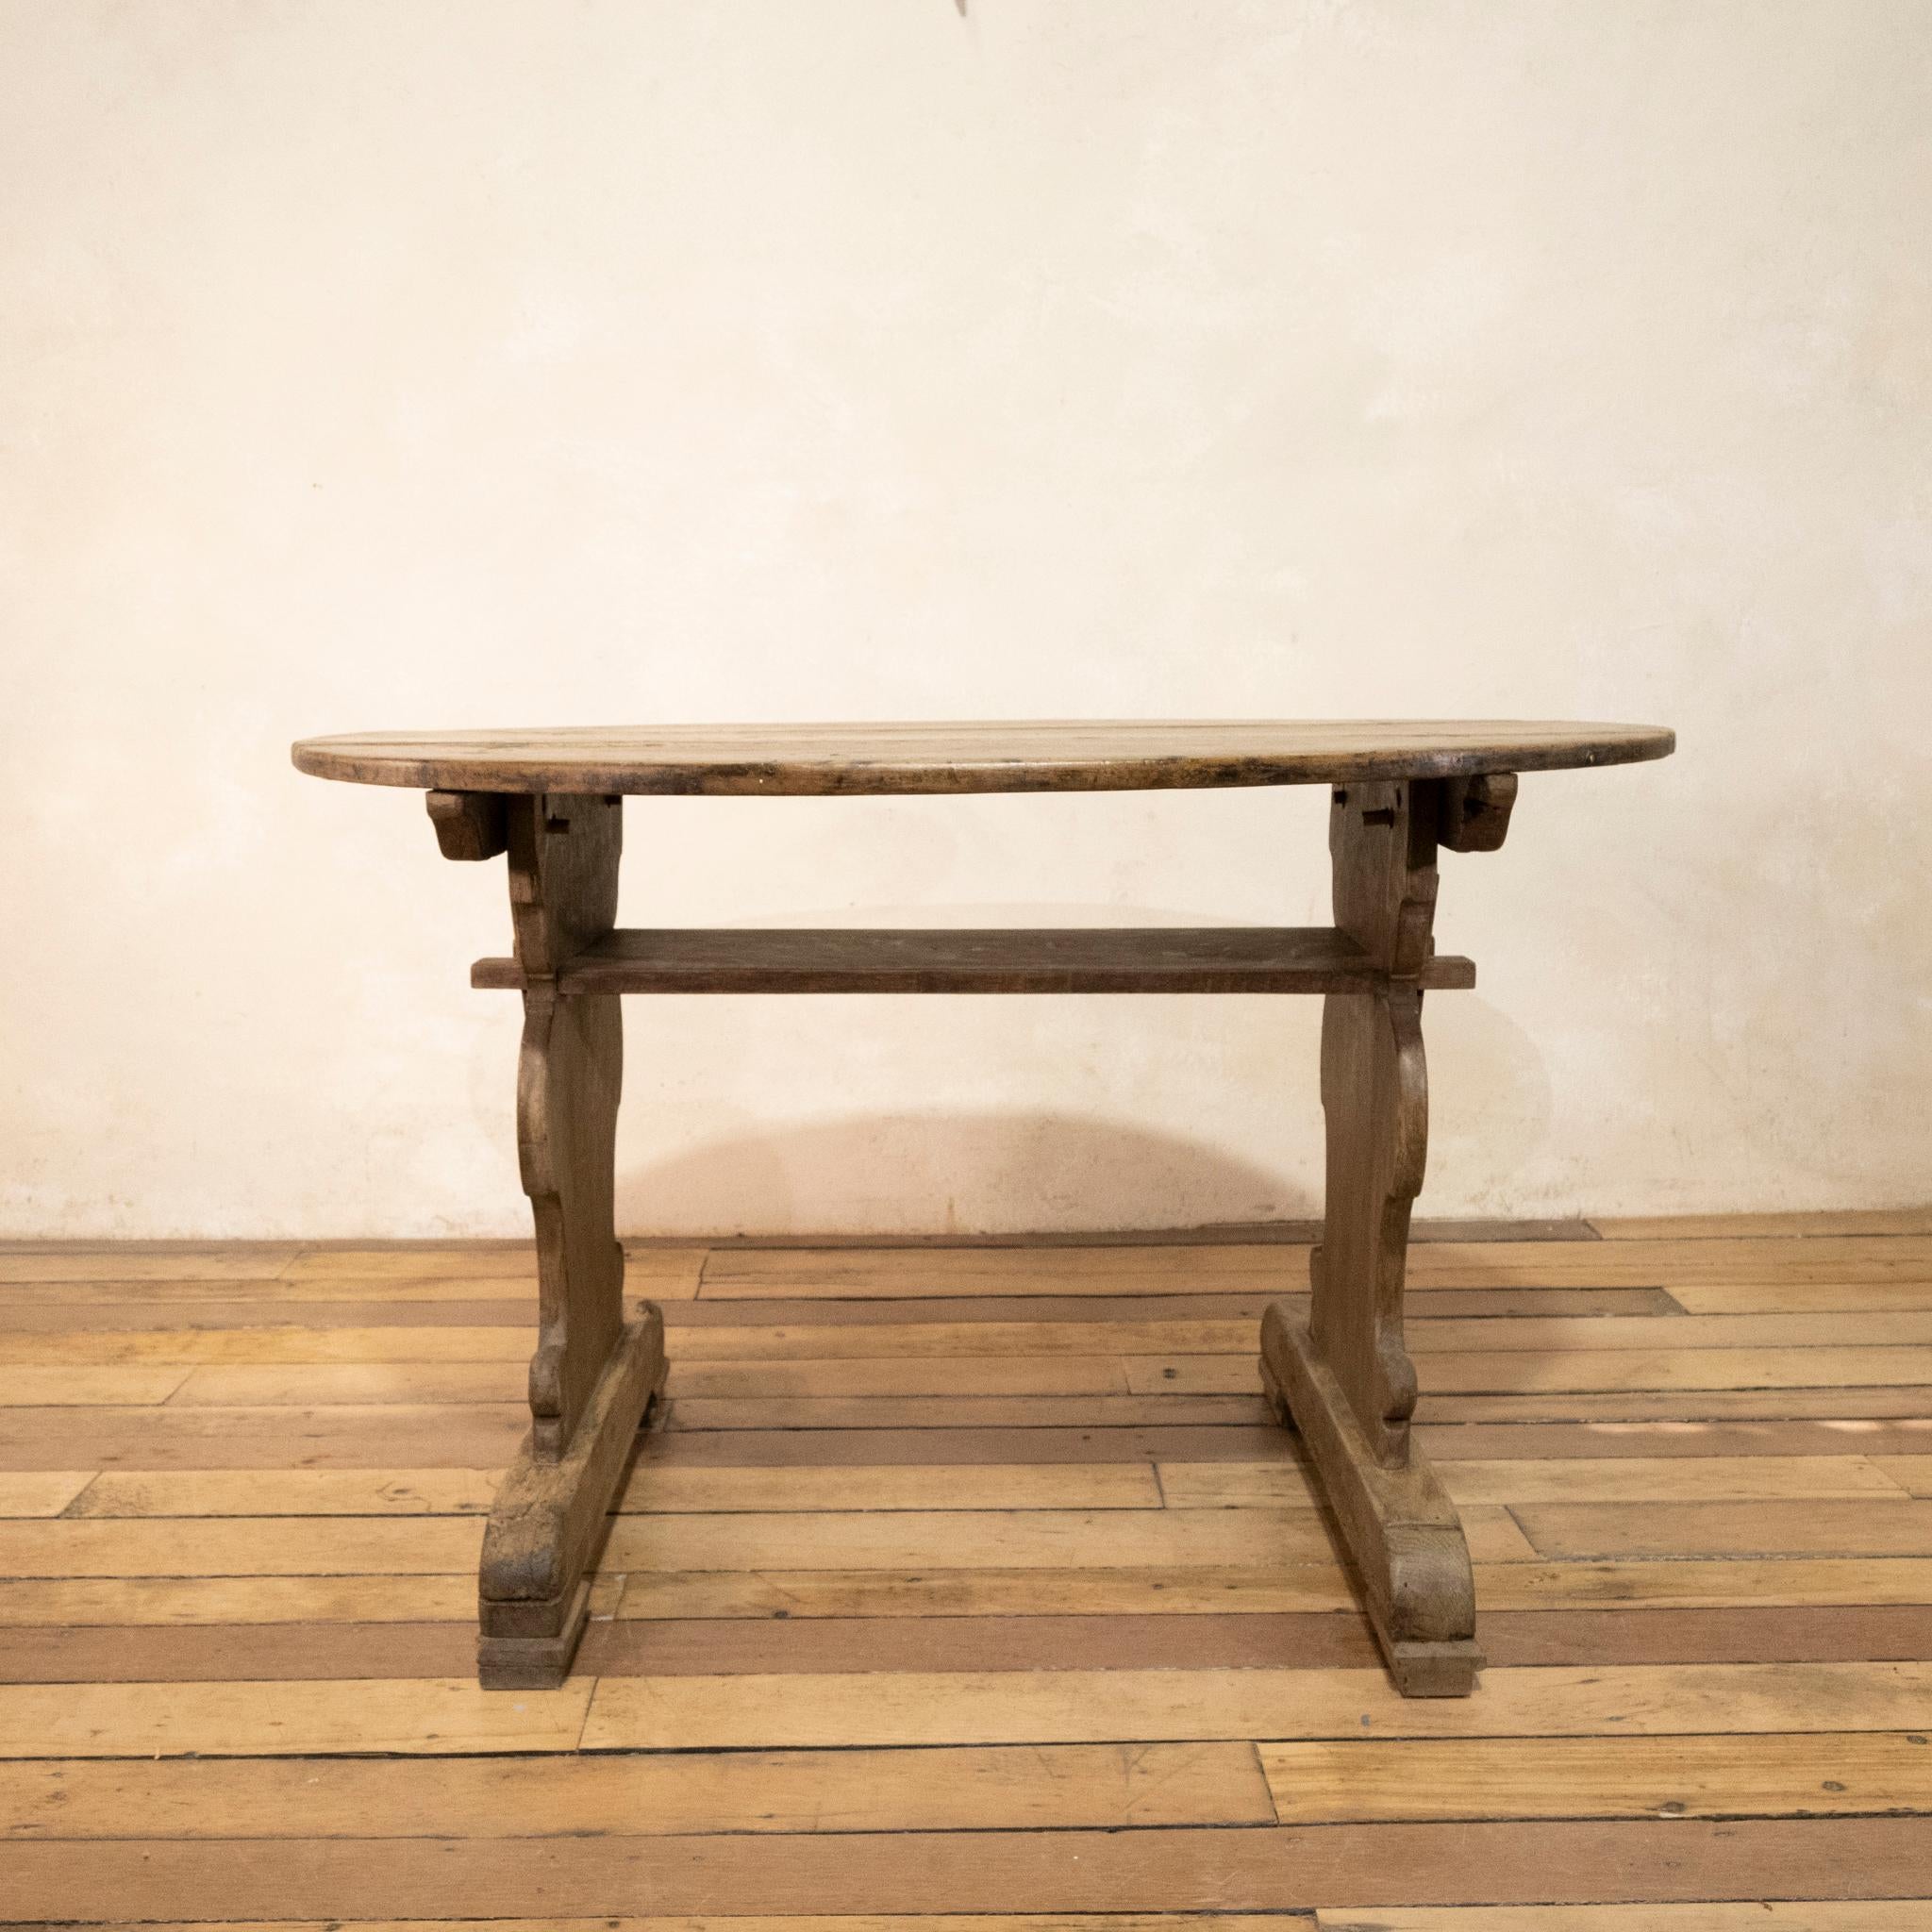 An oval late 18th-century Swedish folk art oak and Walnut Tressel 'Bockbord' table. Featuring a removable oval top raised on T-shaped ends, sat on sledge feet. This table can be easily disassembled for transport, secured by peg and brace fastenings.